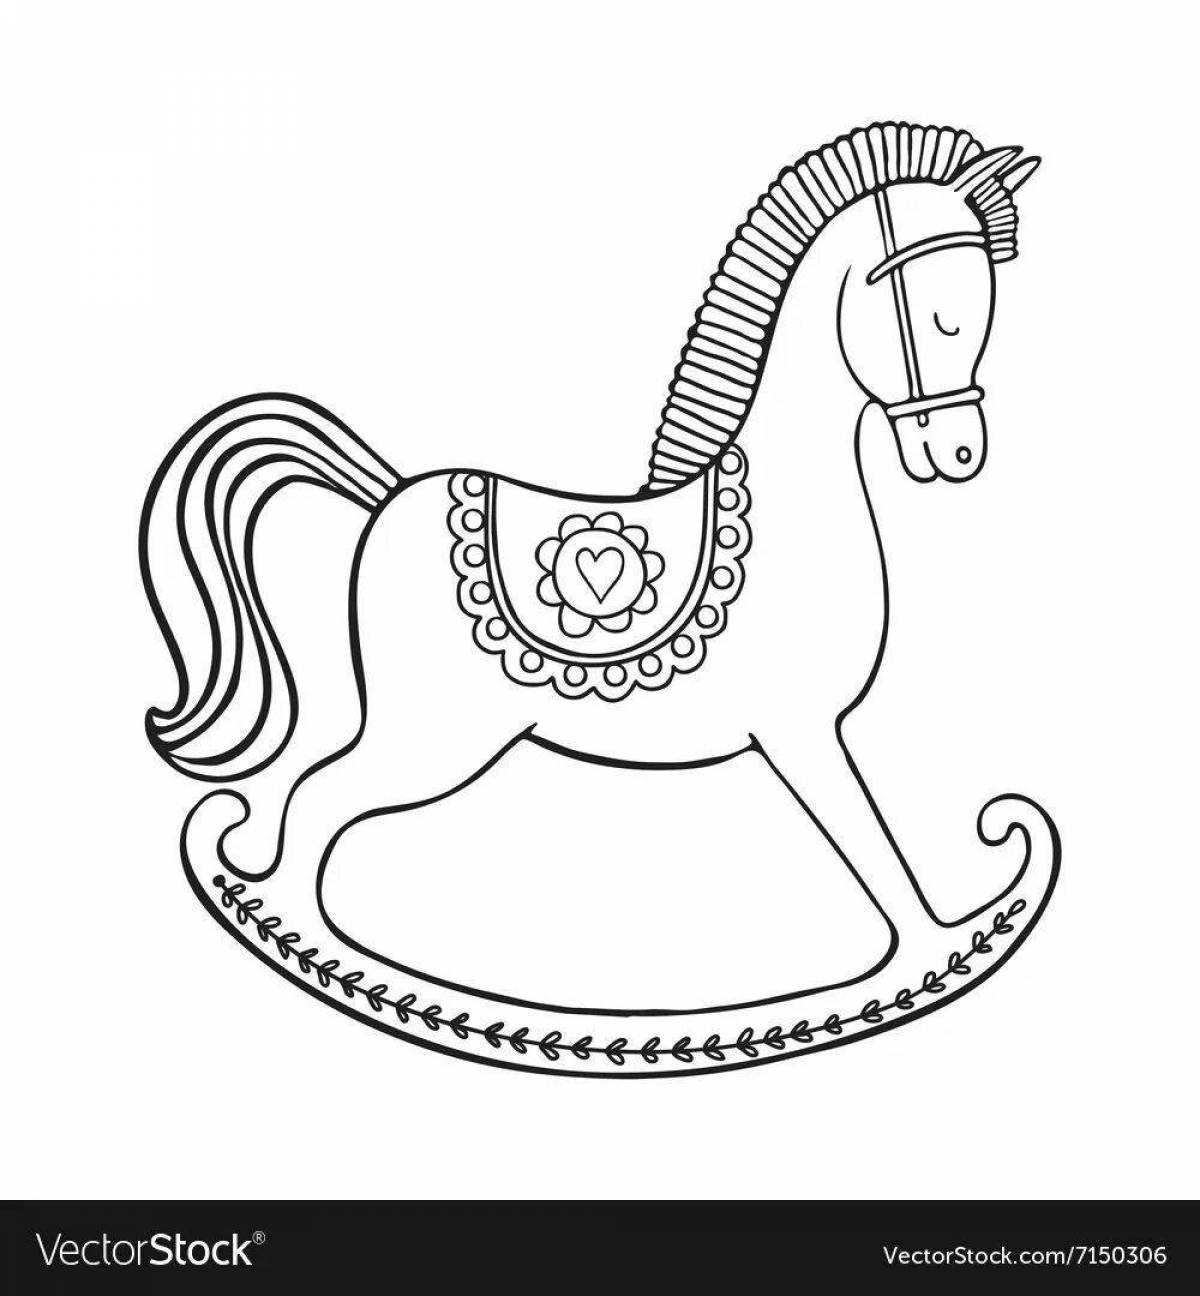 Rocking horse party coloring